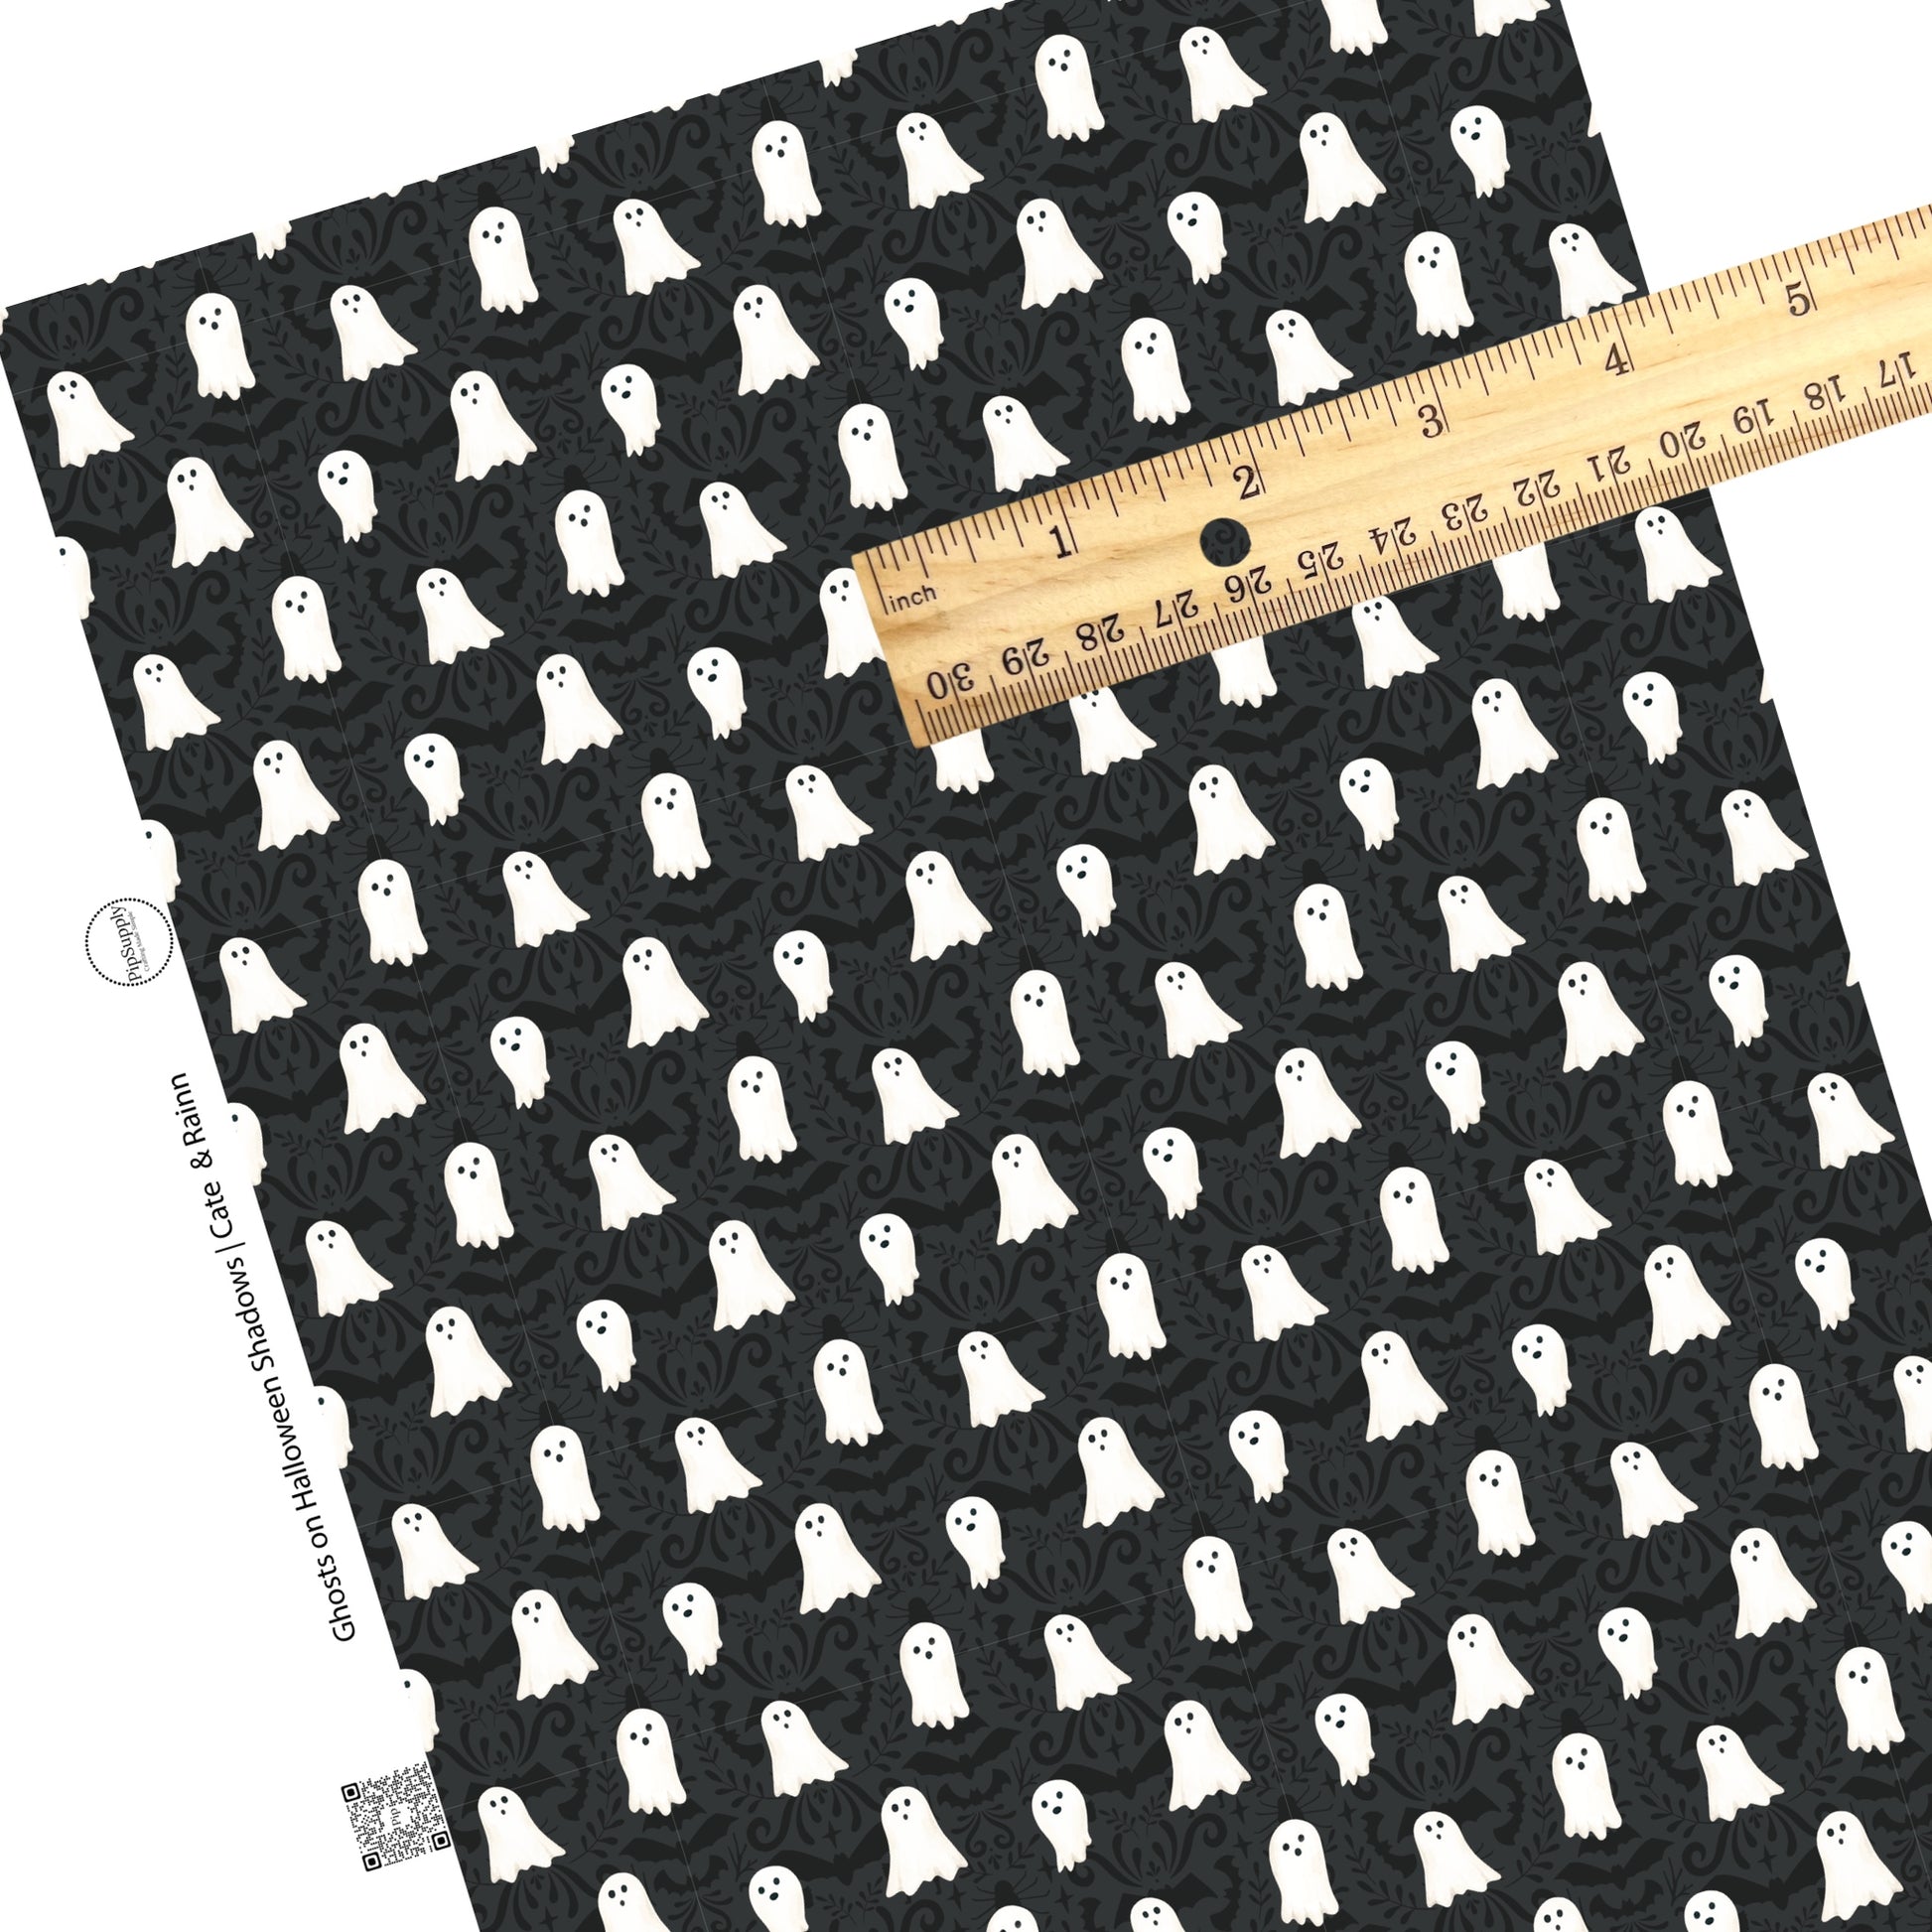 These Halloween themed black faux leather sheets contain the following design elements: white ghosts on a black Halloween pattern. Our CPSIA compliant faux leather sheets or rolls can be used for all types of crafting projects.